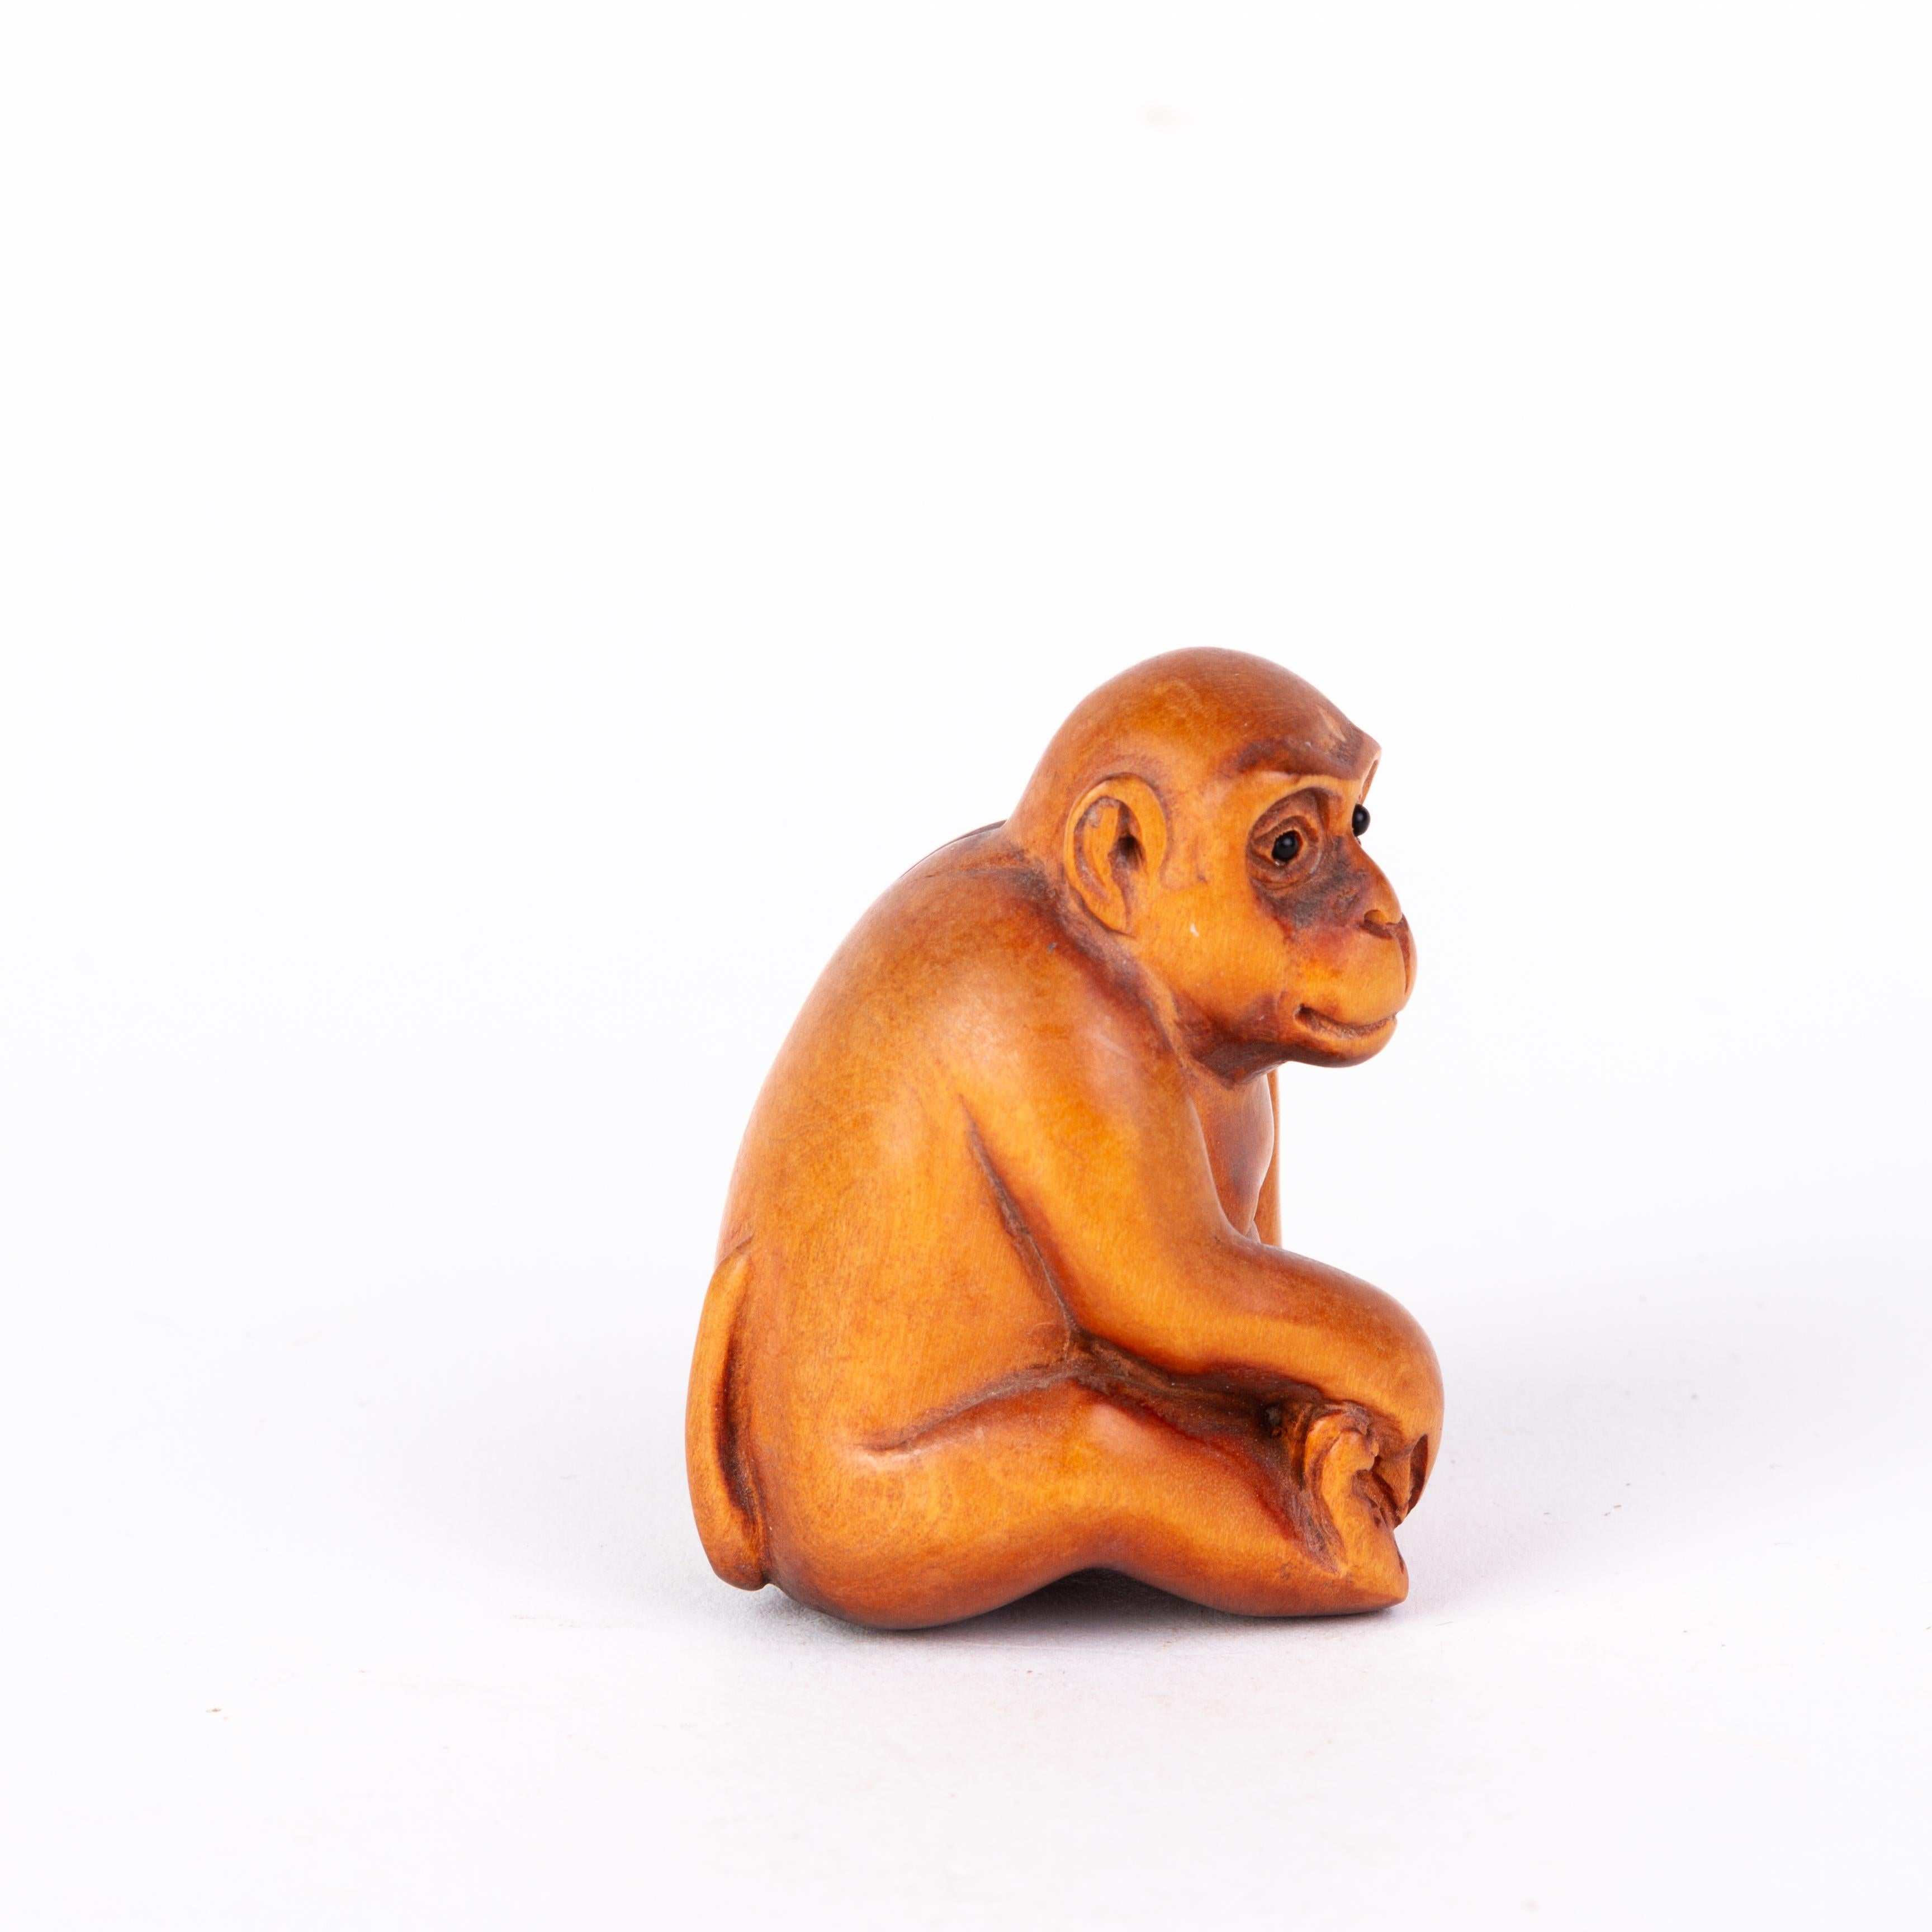 Japanese Carved boxwood Netsuke Inro Ojime
Very good condition.
From a private collection.
Free international shipping.